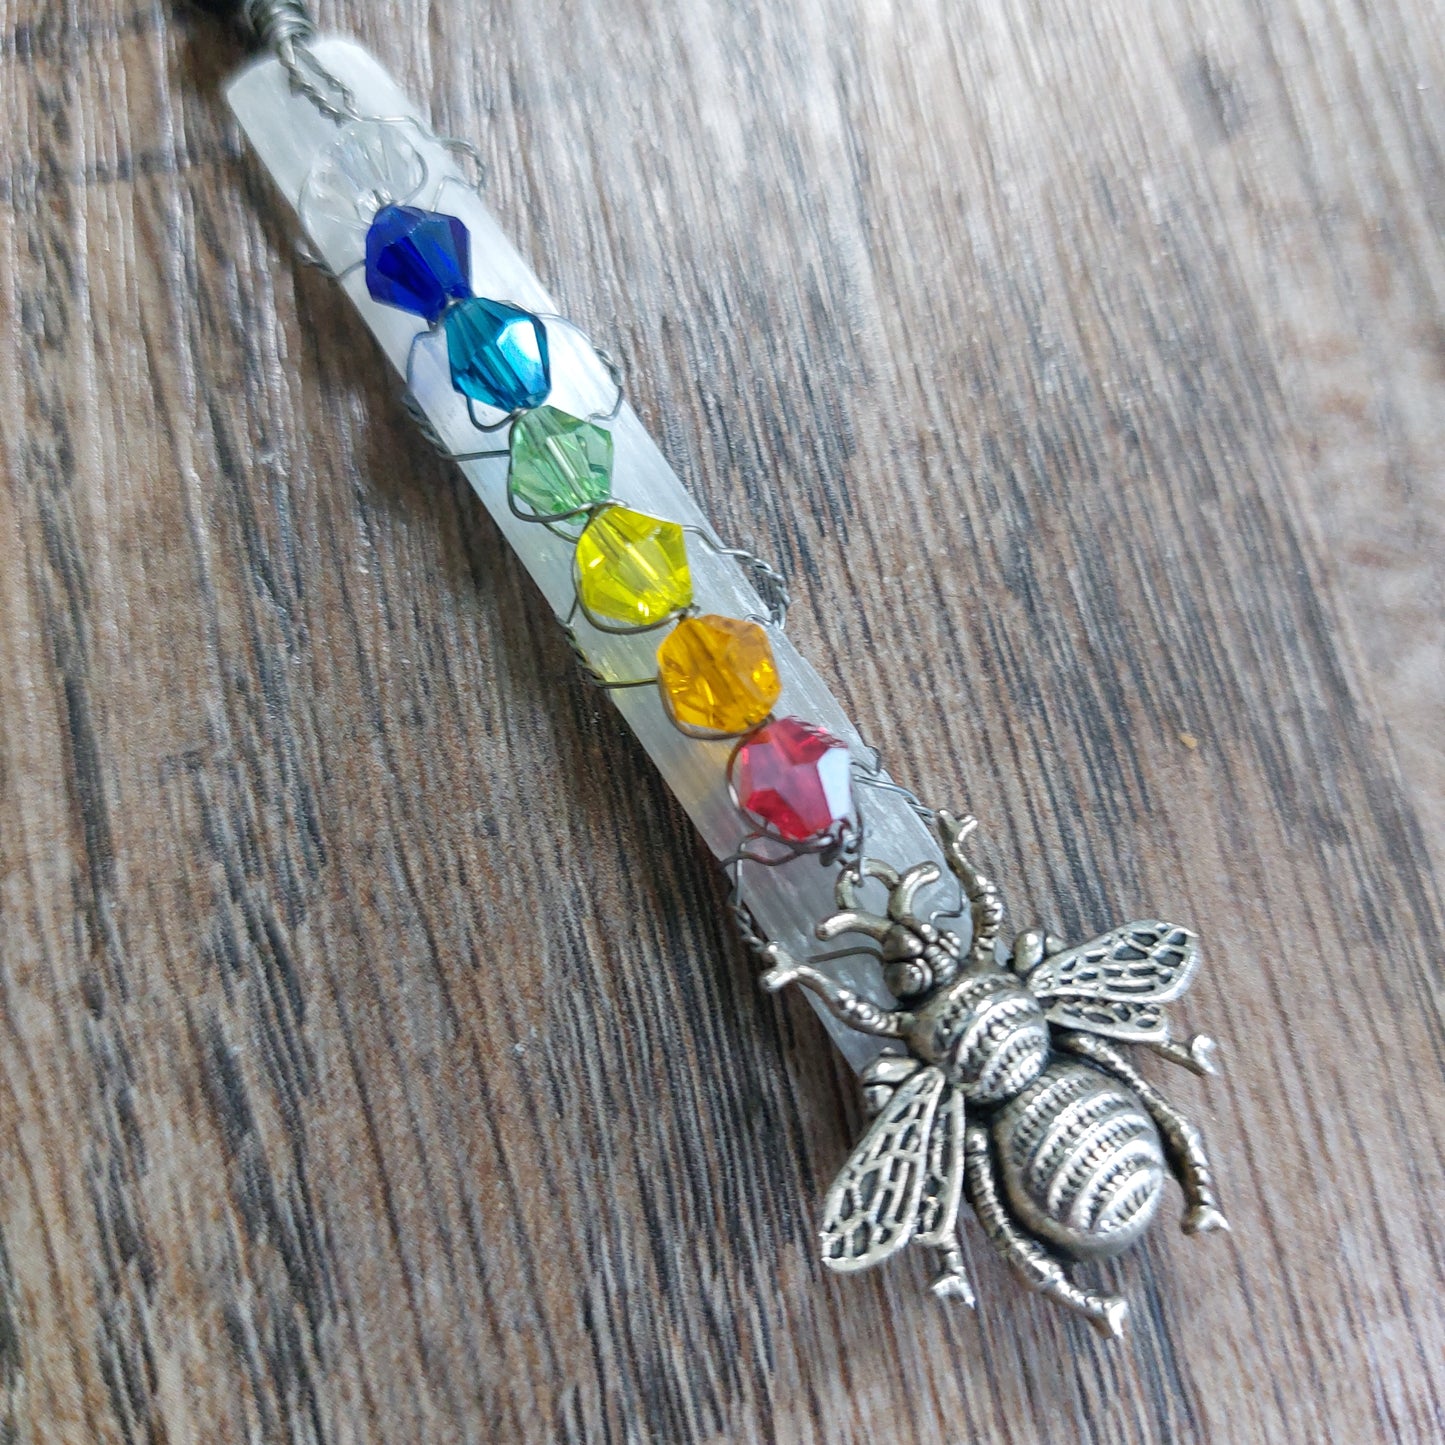 Selenite car charm with chakra beads and honeycomb/bee